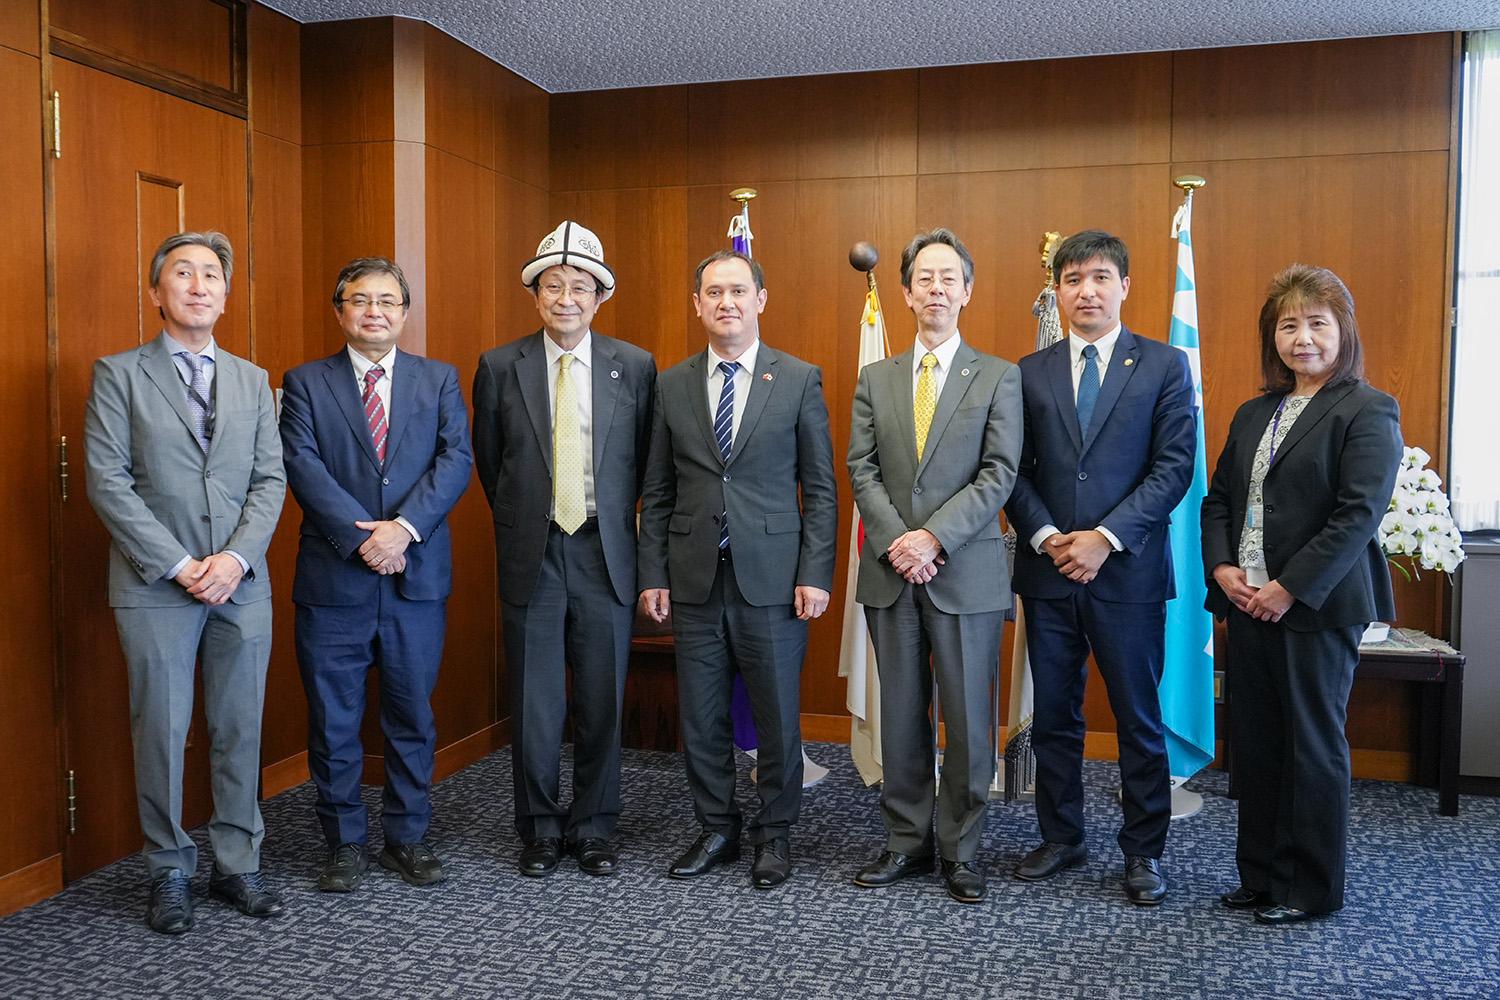 Meeting with President NAGATA and Vice Presidents